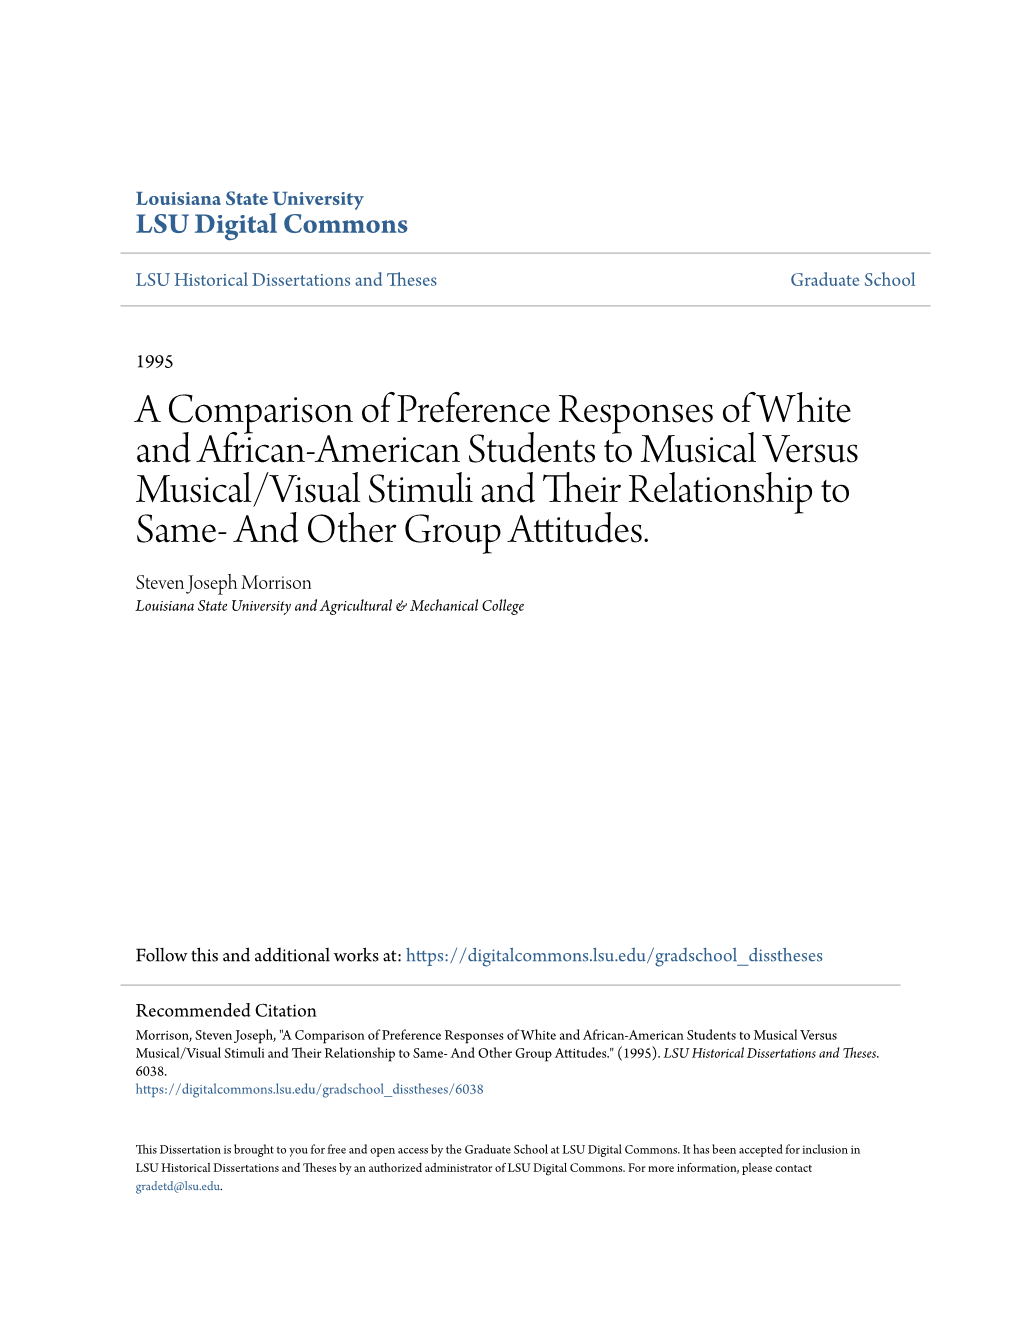 A Comparison of Preference Responses of White and African